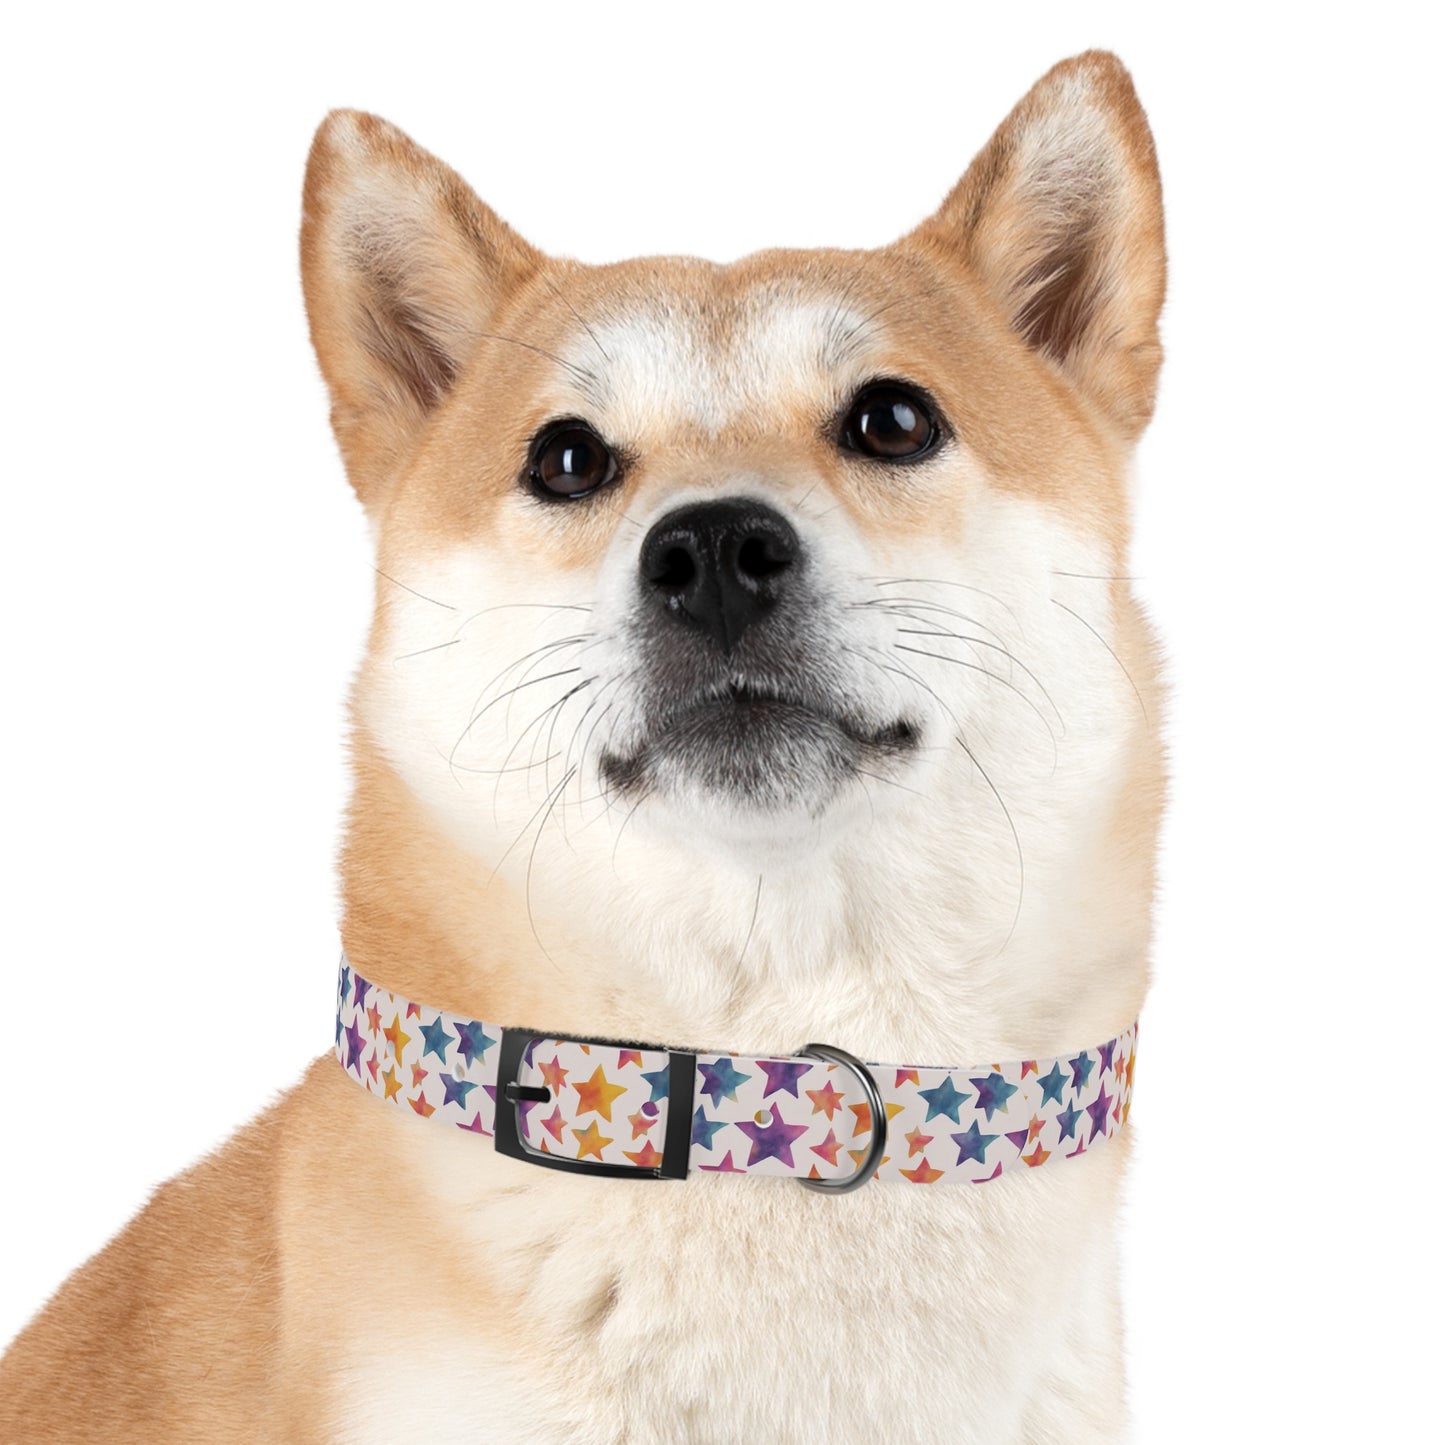 Colorful Stars Watercolor Pattern Dog Collar